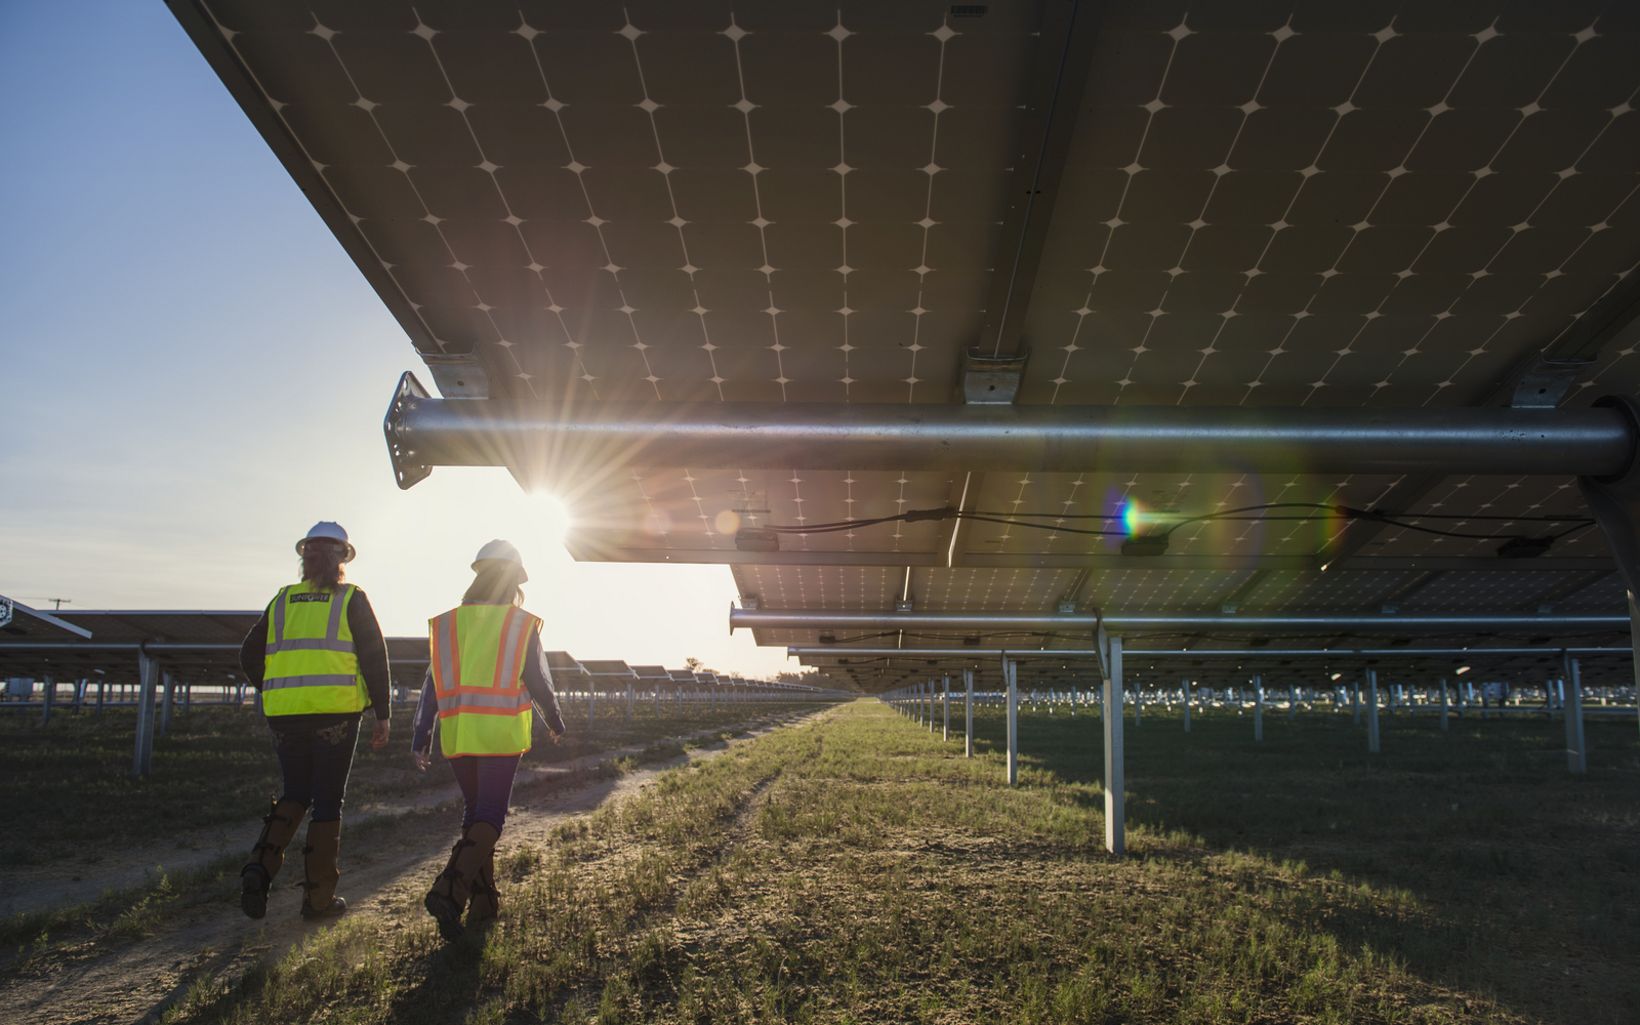 TNC’s Laura Crane and a Fuller Star employee walking through the array of solar panels  in Lancaster, California